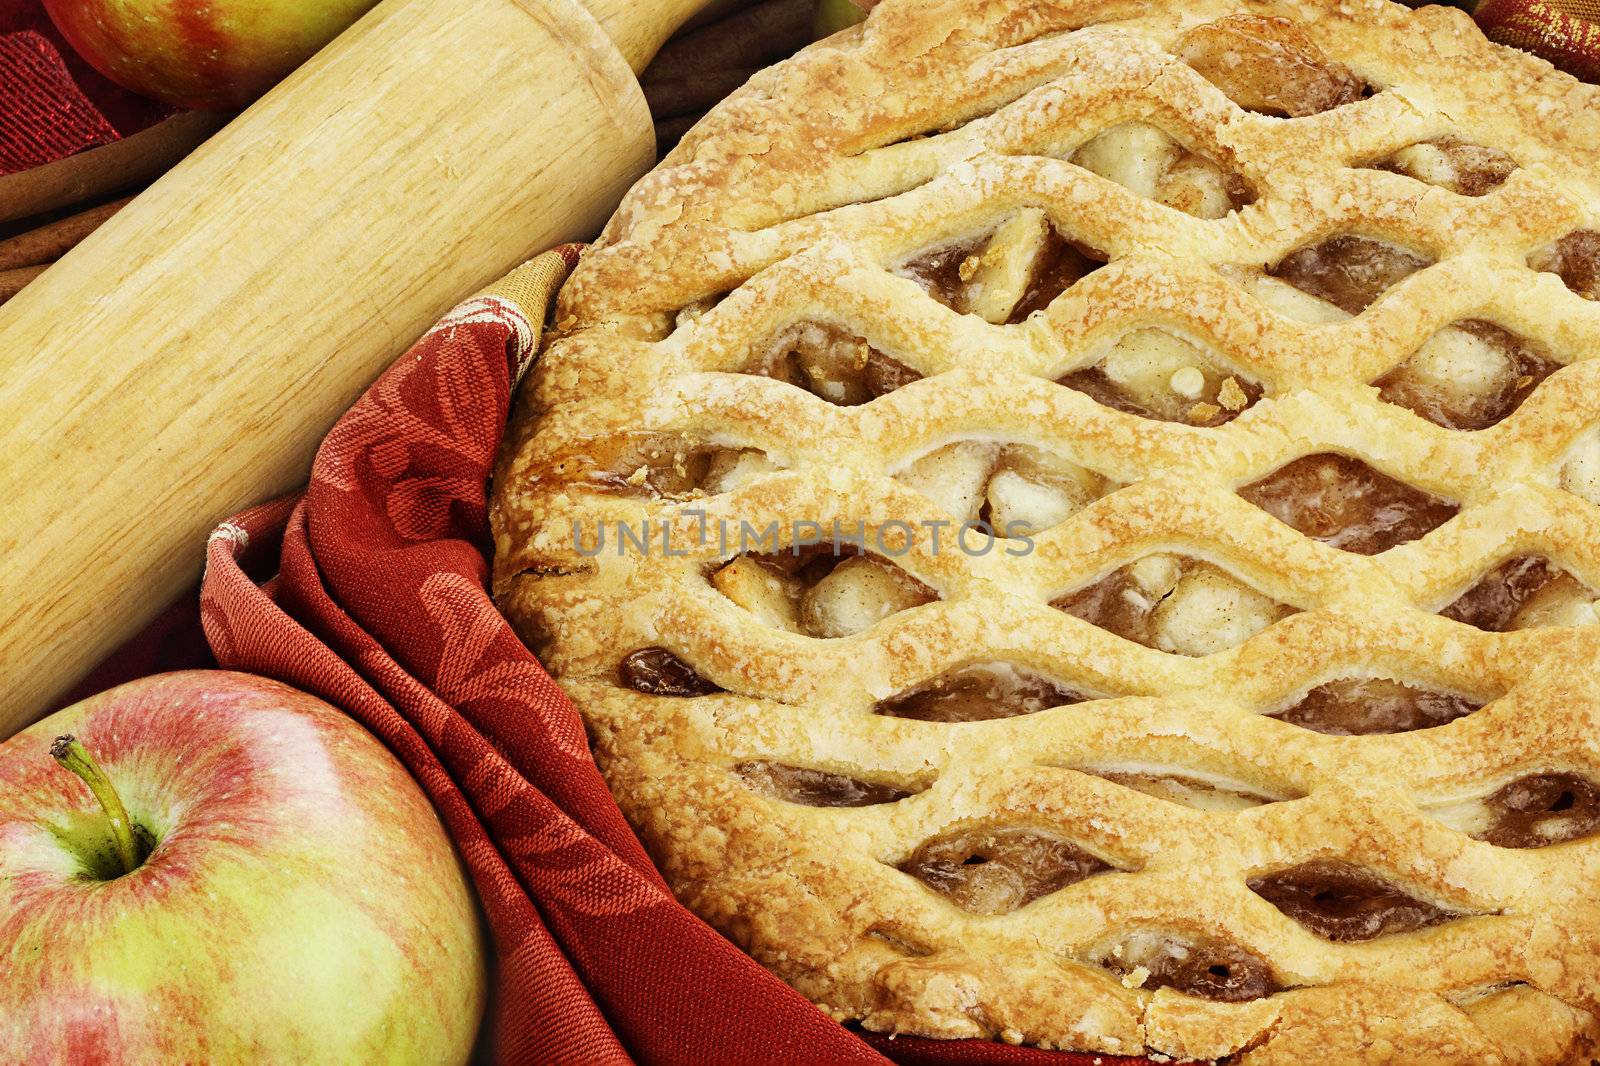 Delicious fresh baked apple pie with rolling pin and ingredients. Perfect for the holidays.